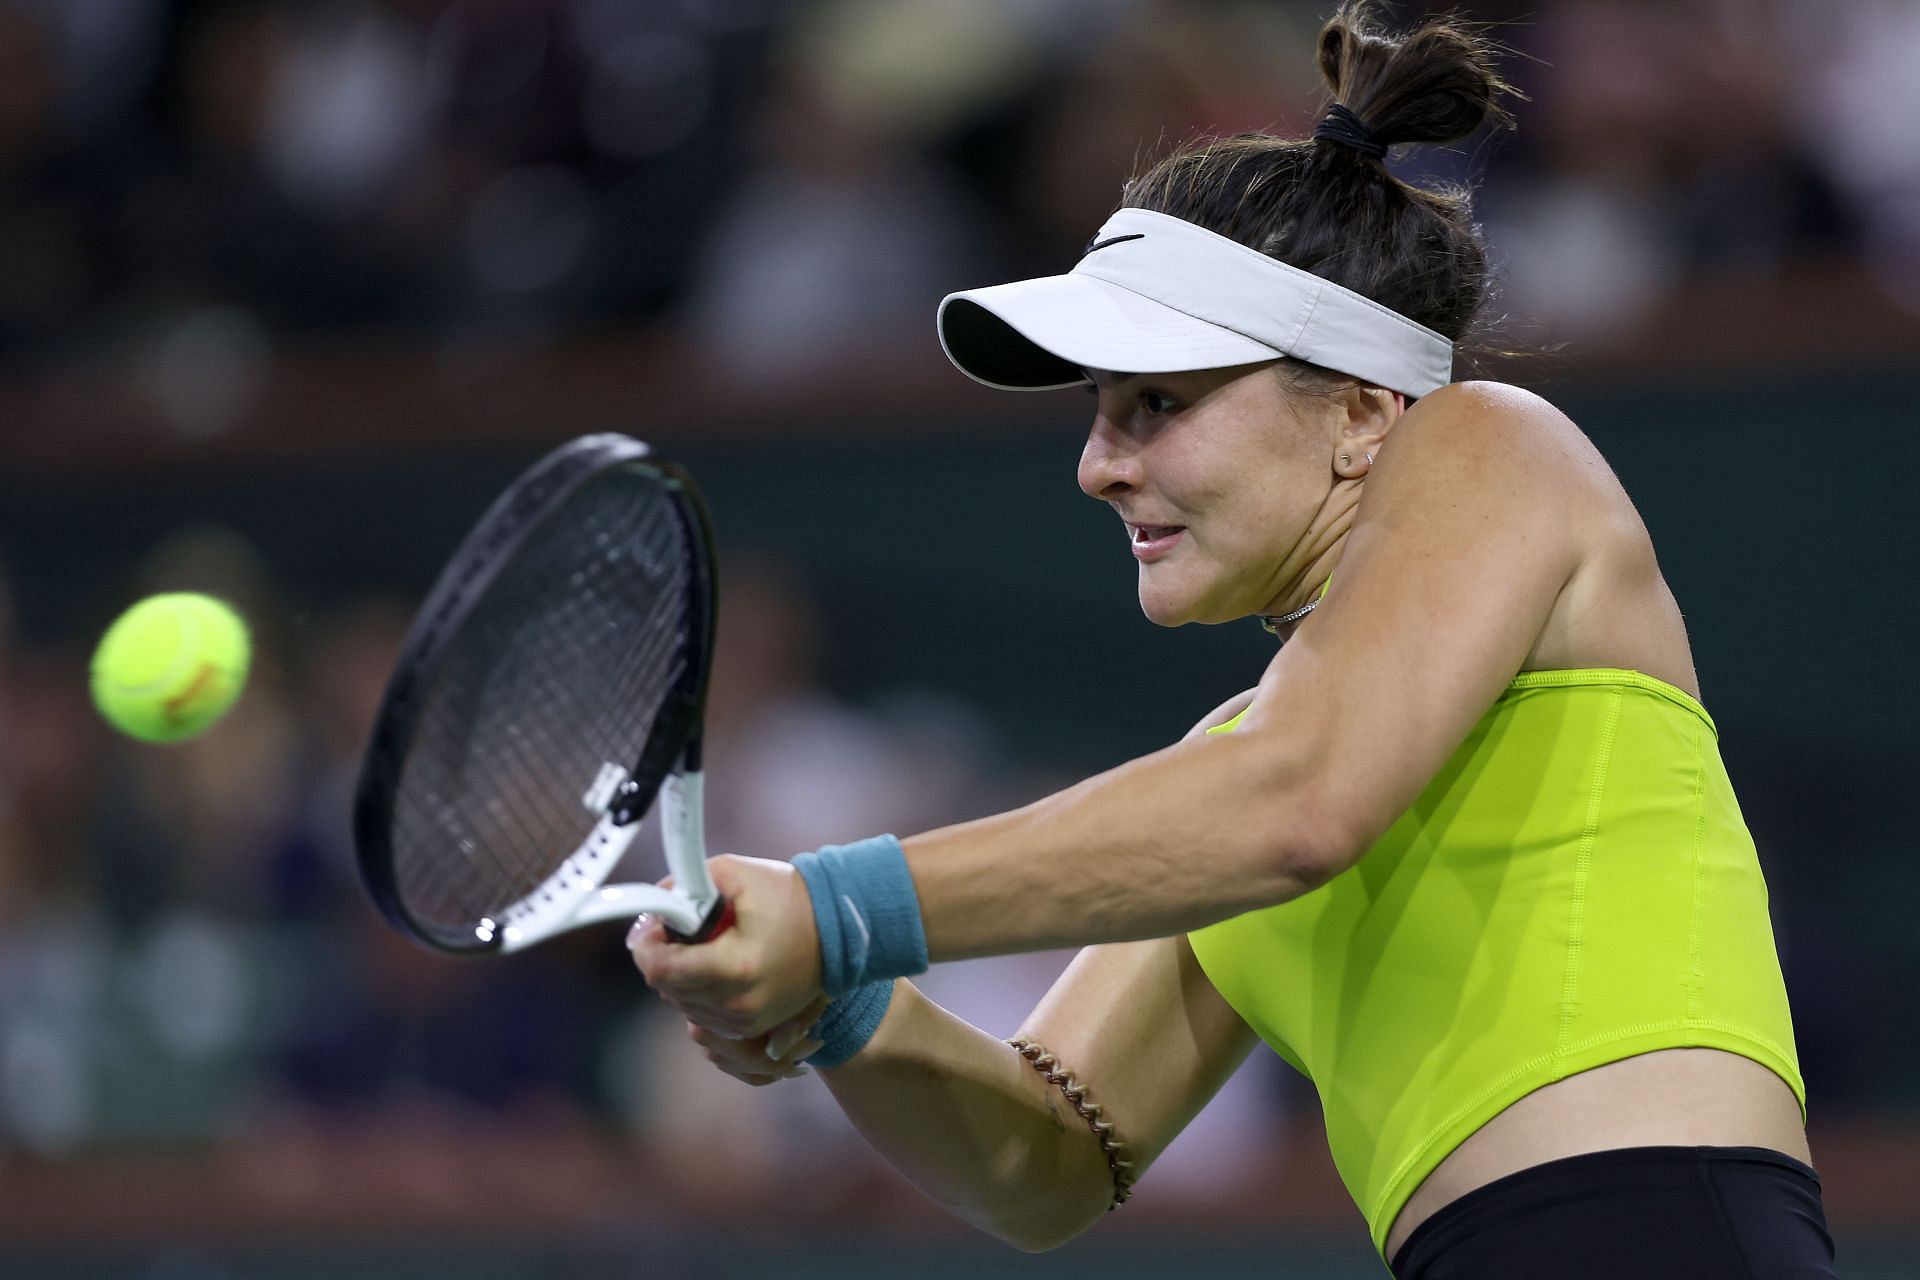 Andreescu strikes the ball at the BNP Paribas Open